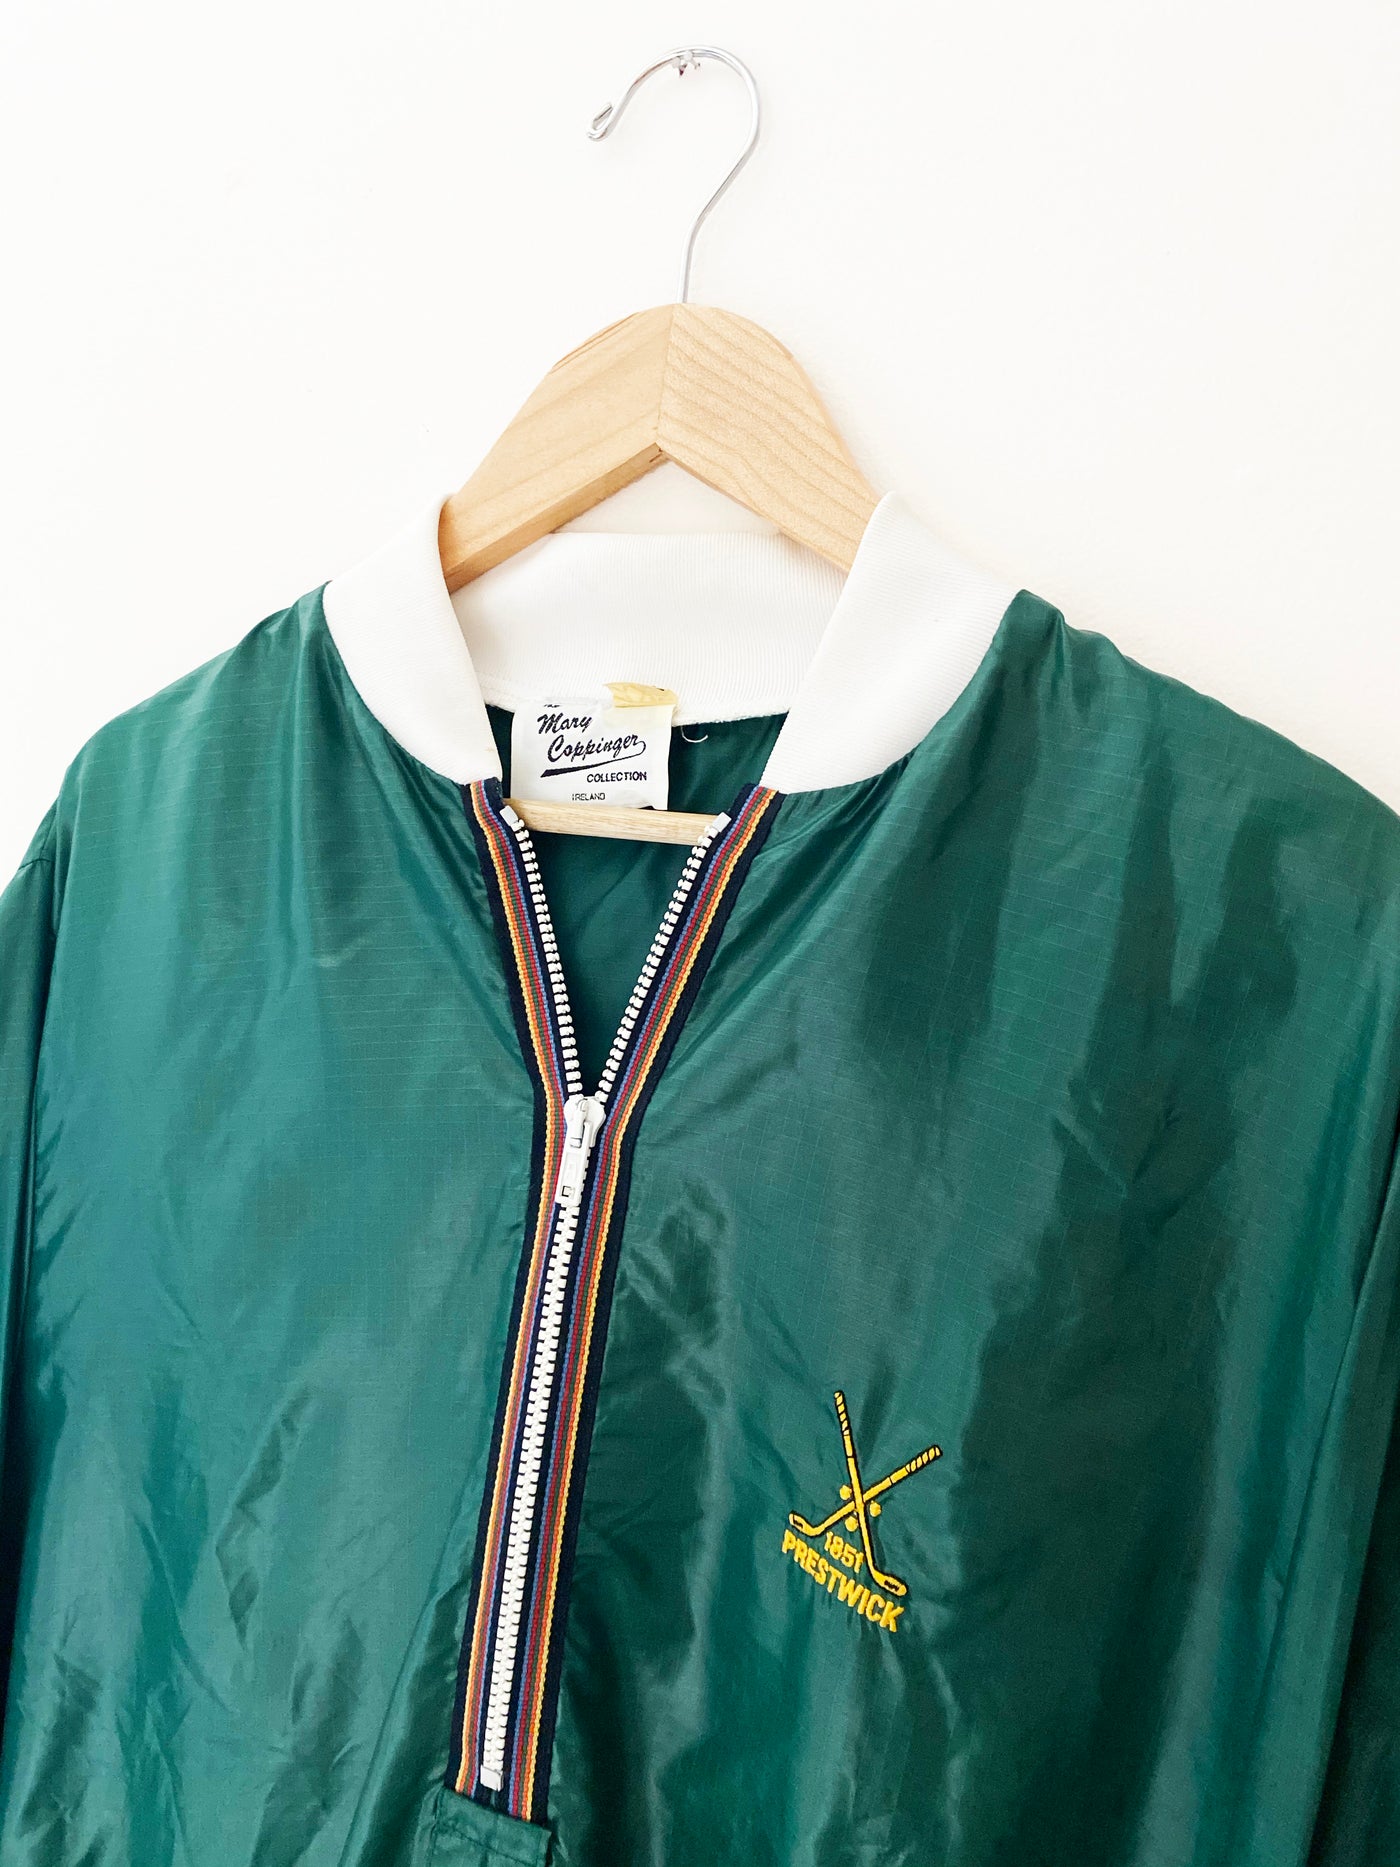 Vintage 80s Mary Coppinger Collection Prestwick Golf Windbreaker